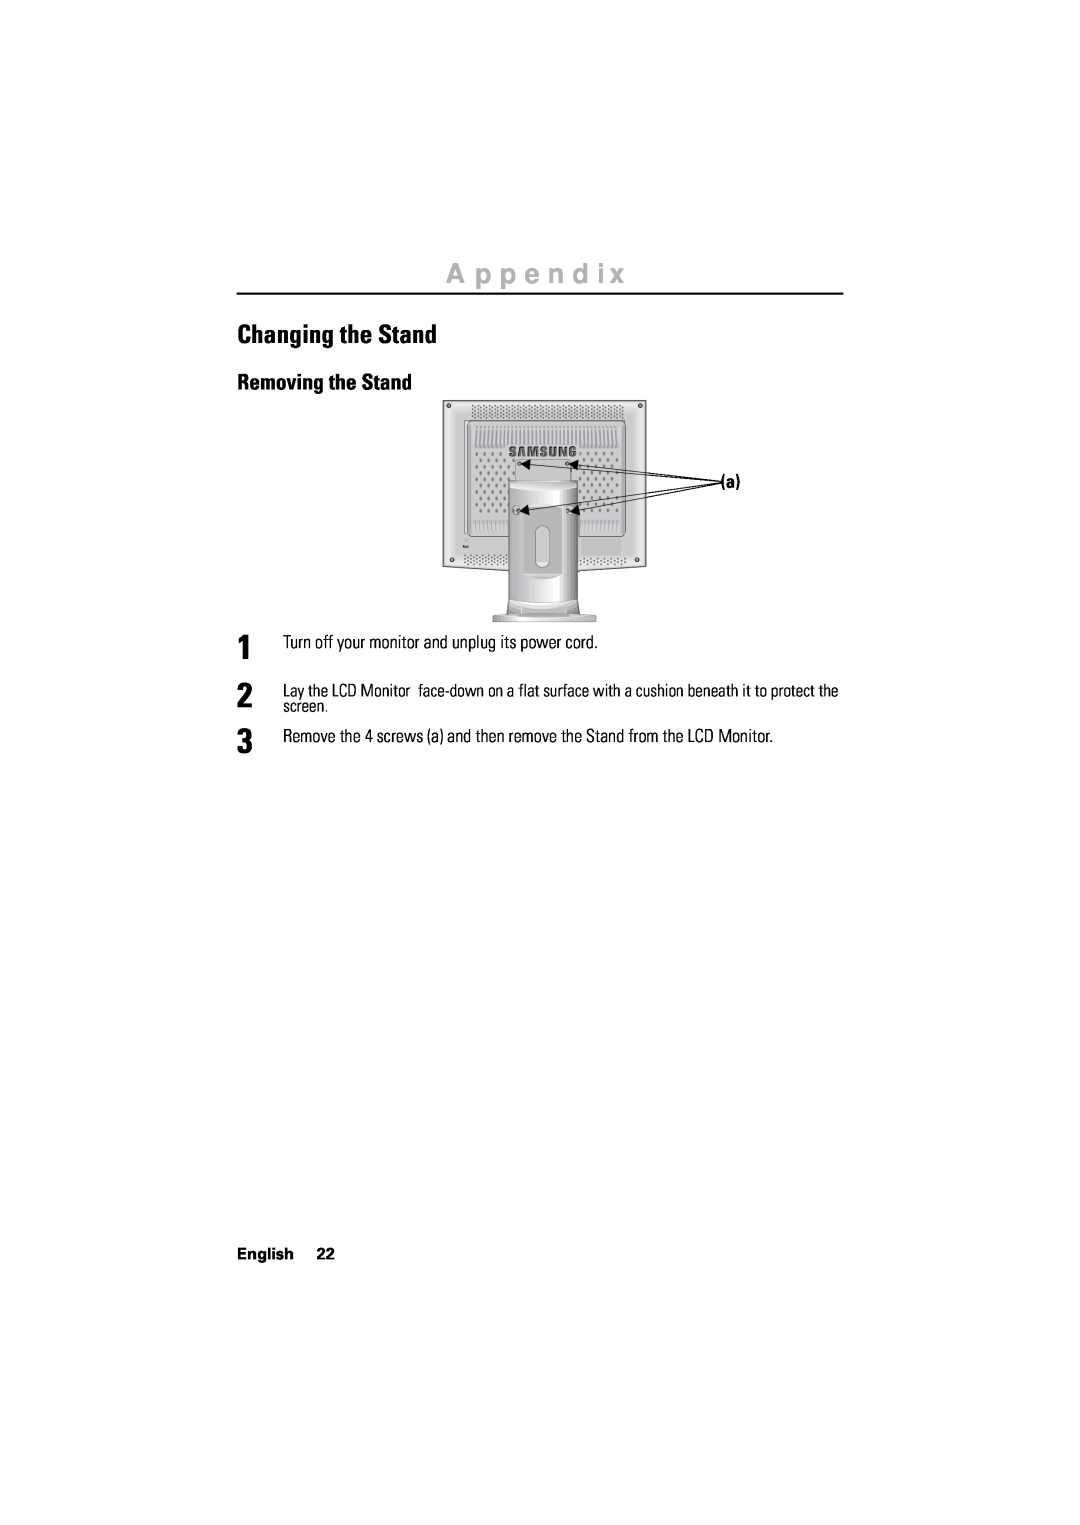 Samsung 170T manual Changing the Stand, Removing the Stand, Appendix, English 